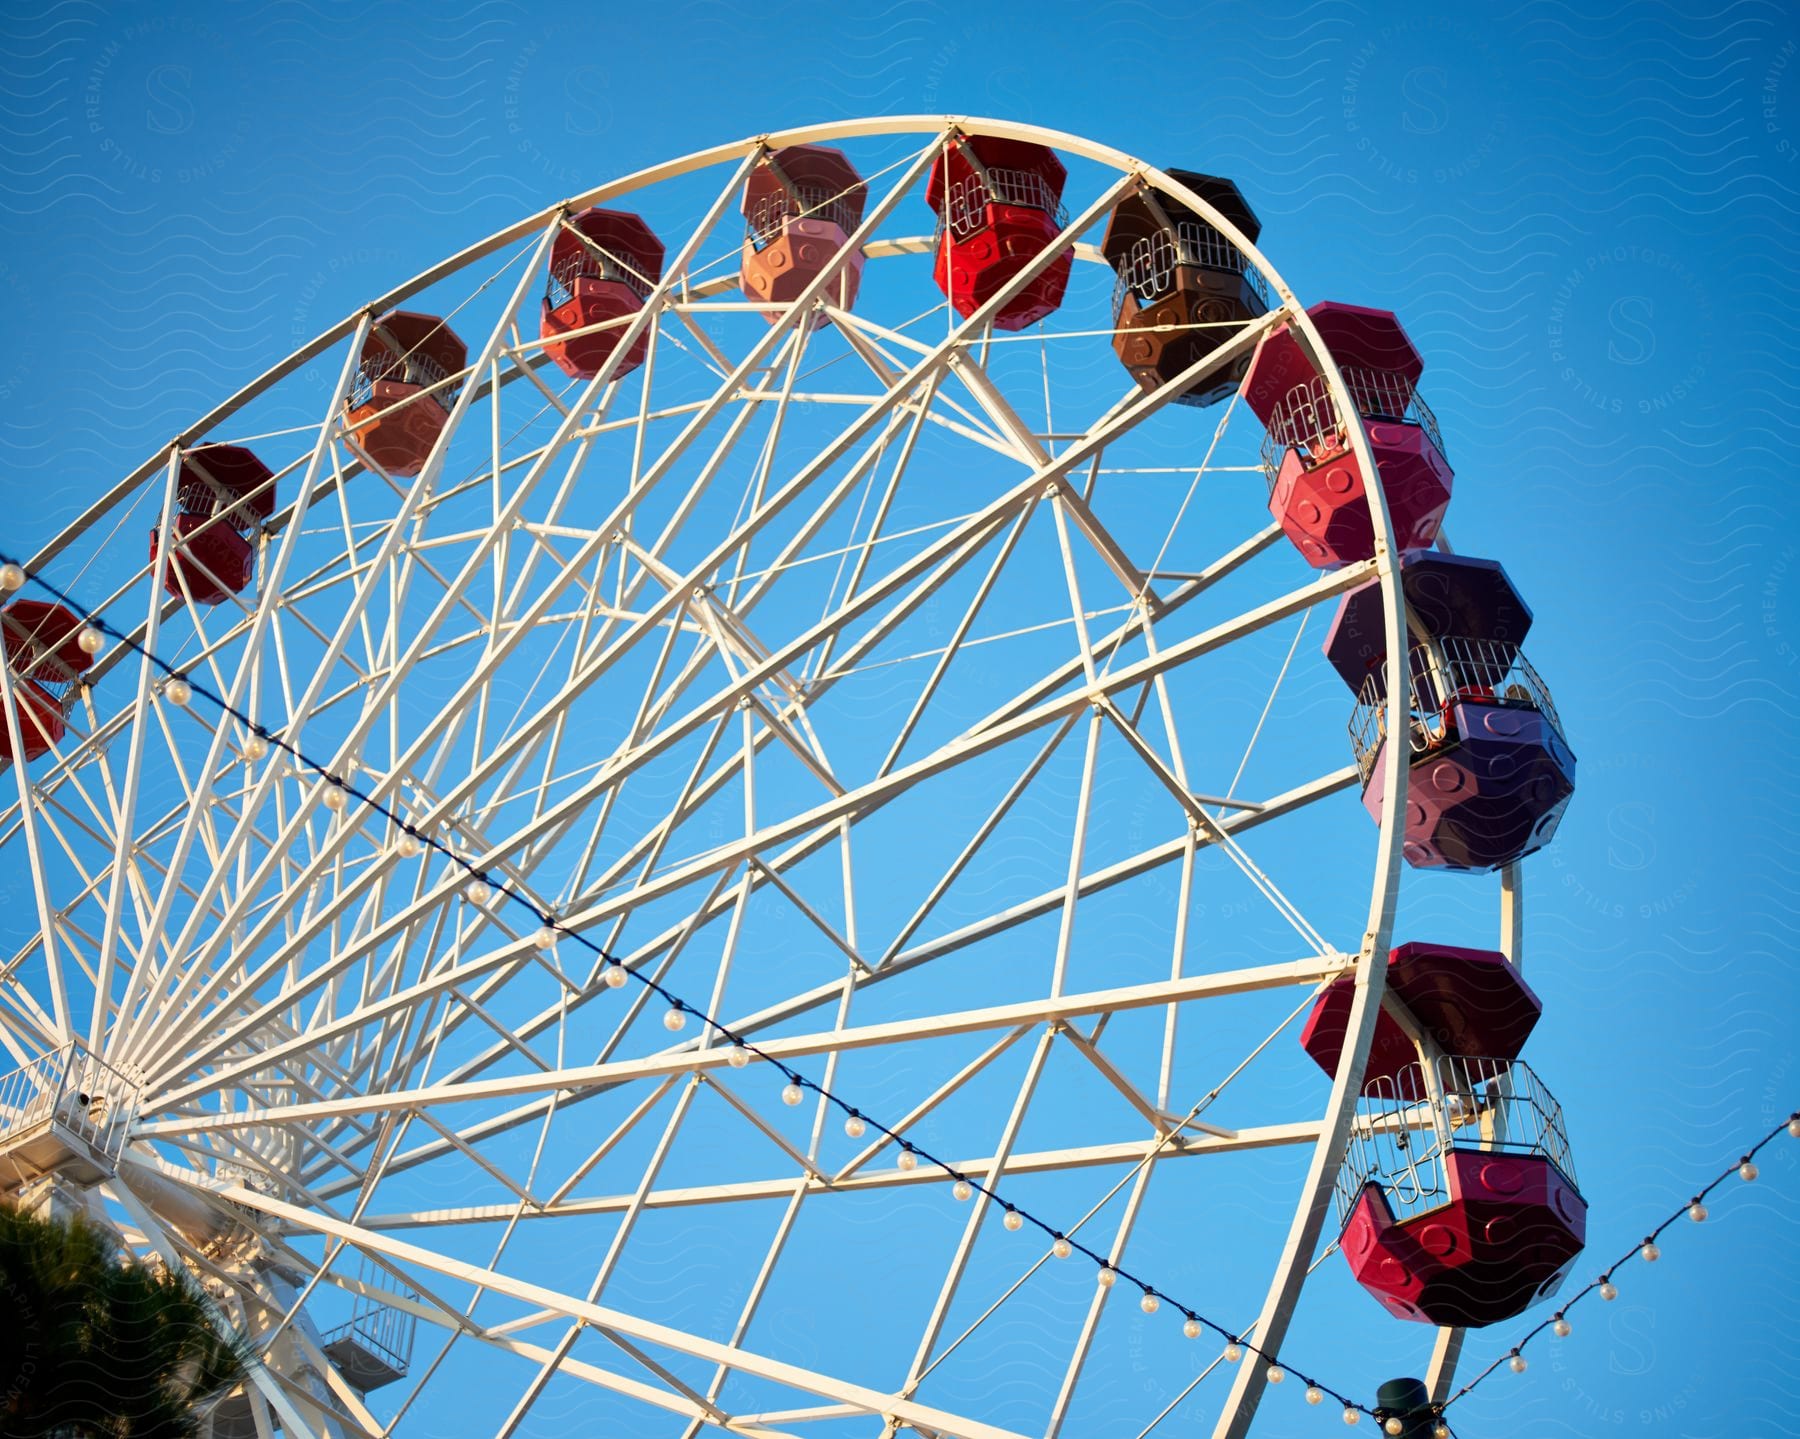 Colorful Ferris wheel cars contrast with the blue sky.